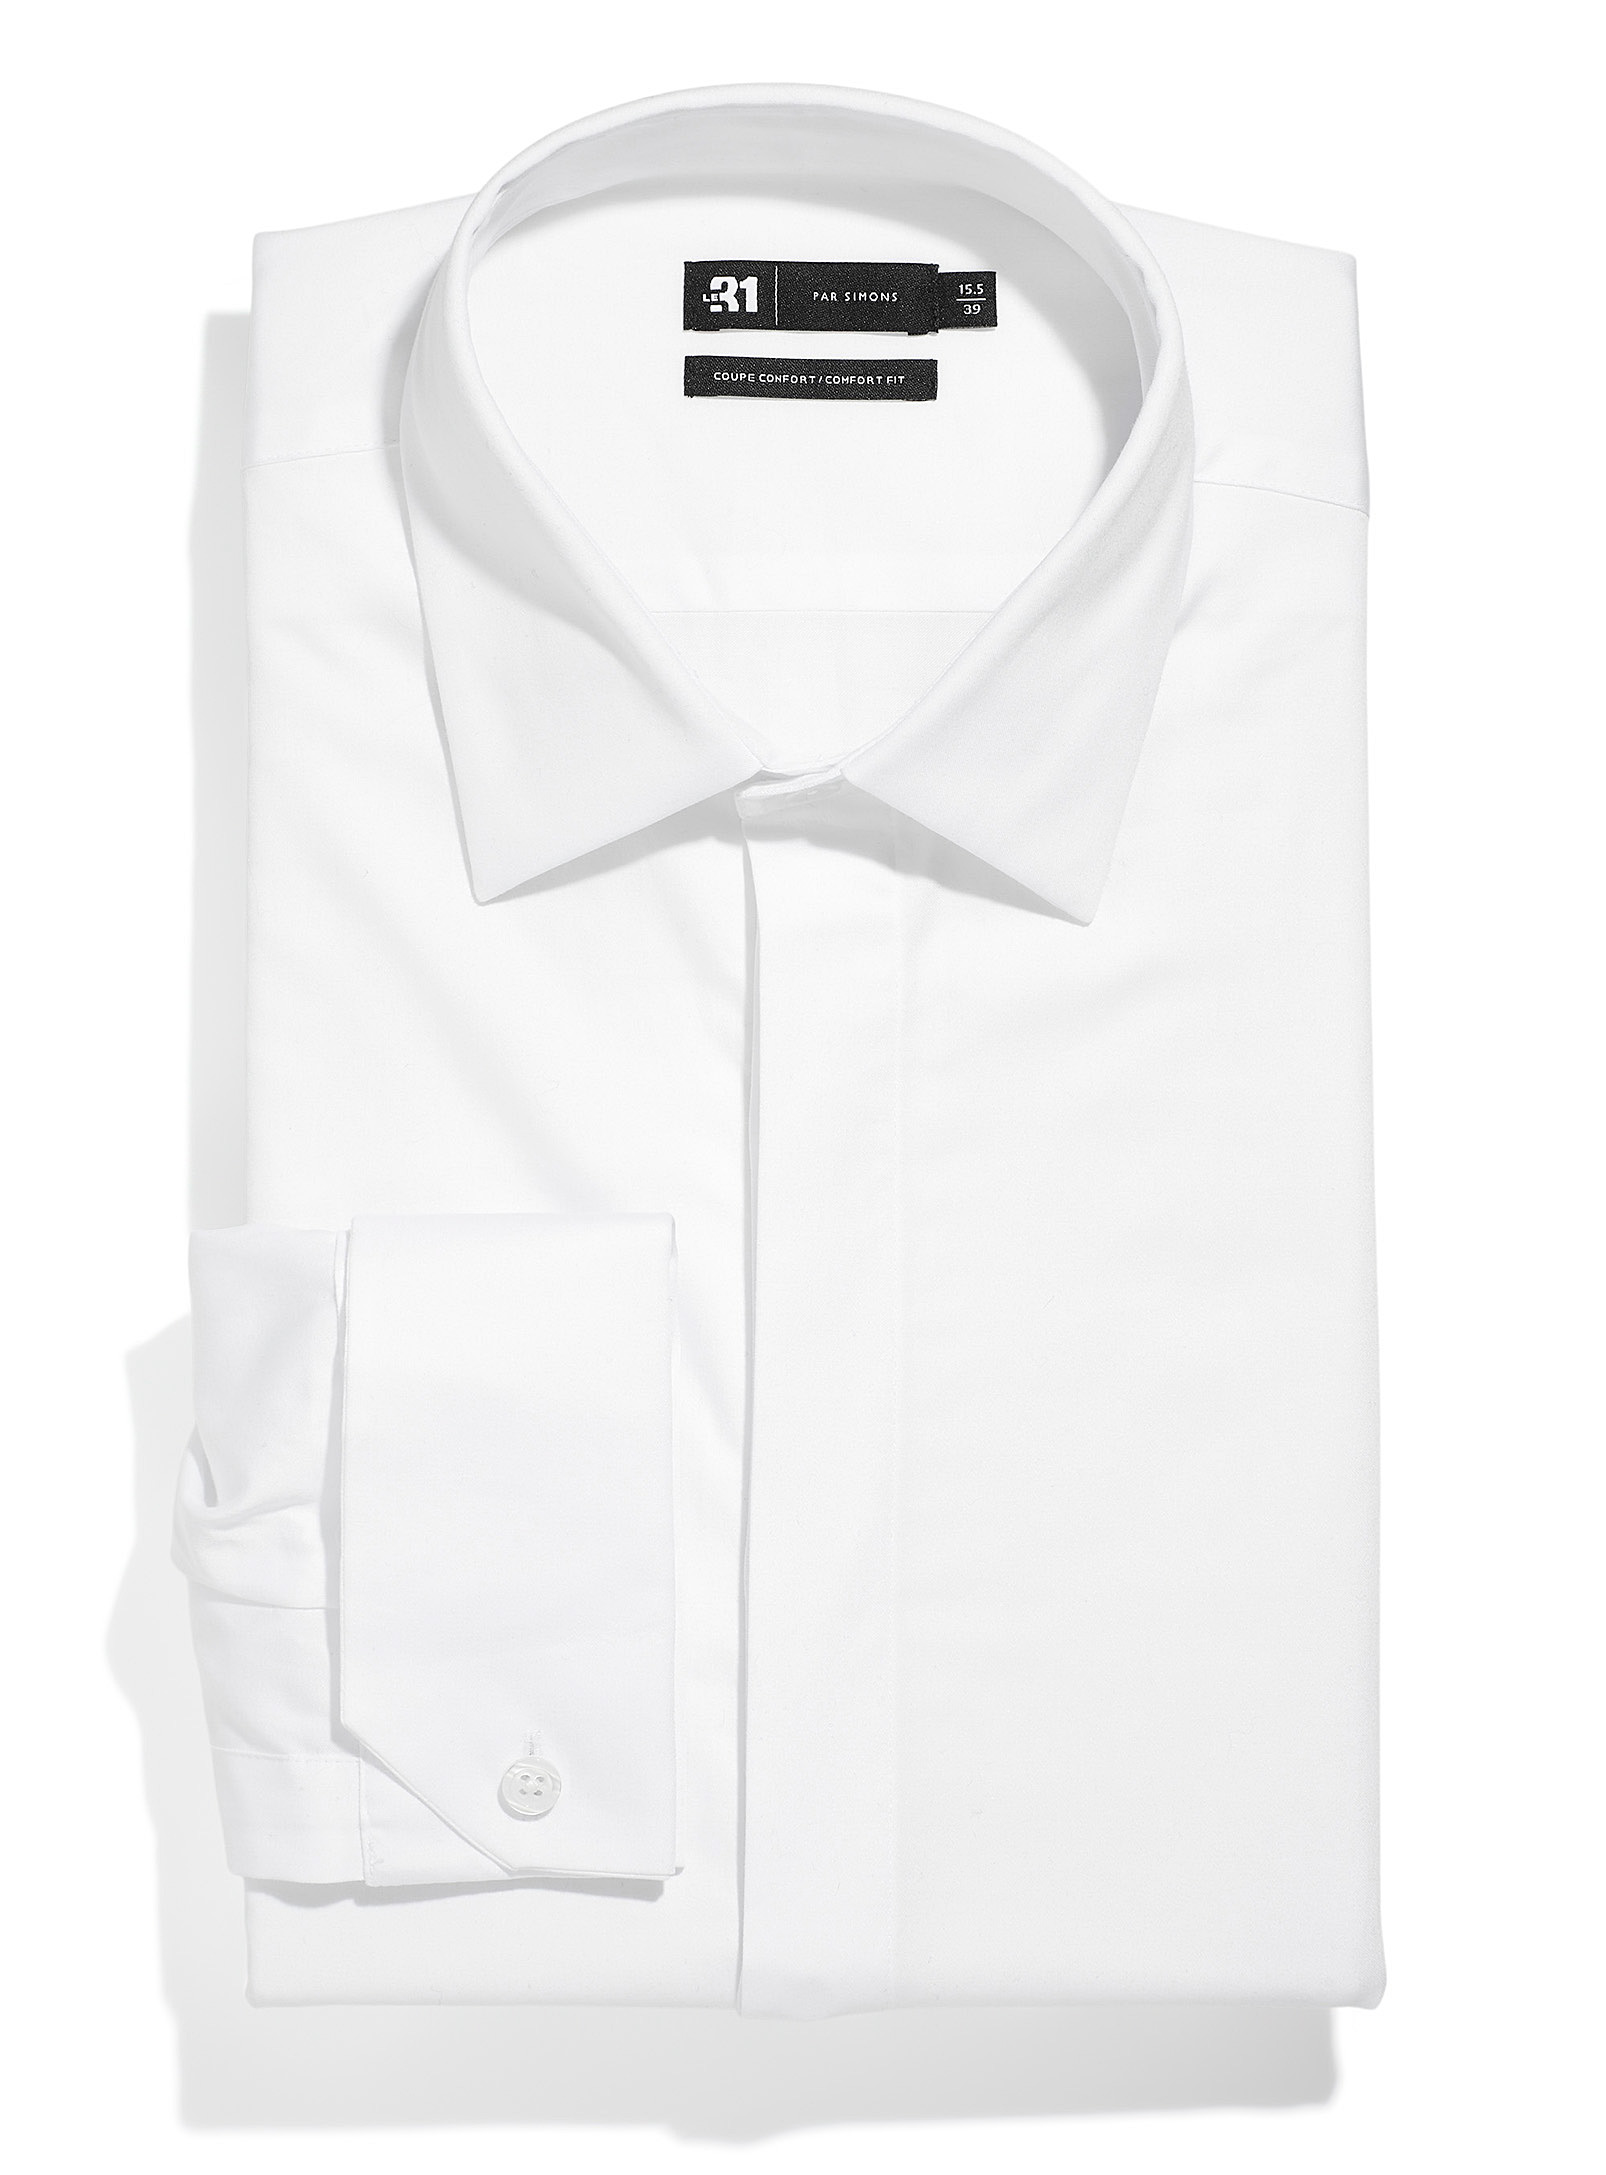 Le 31 - Men's French cuff white shirt Comfort fit